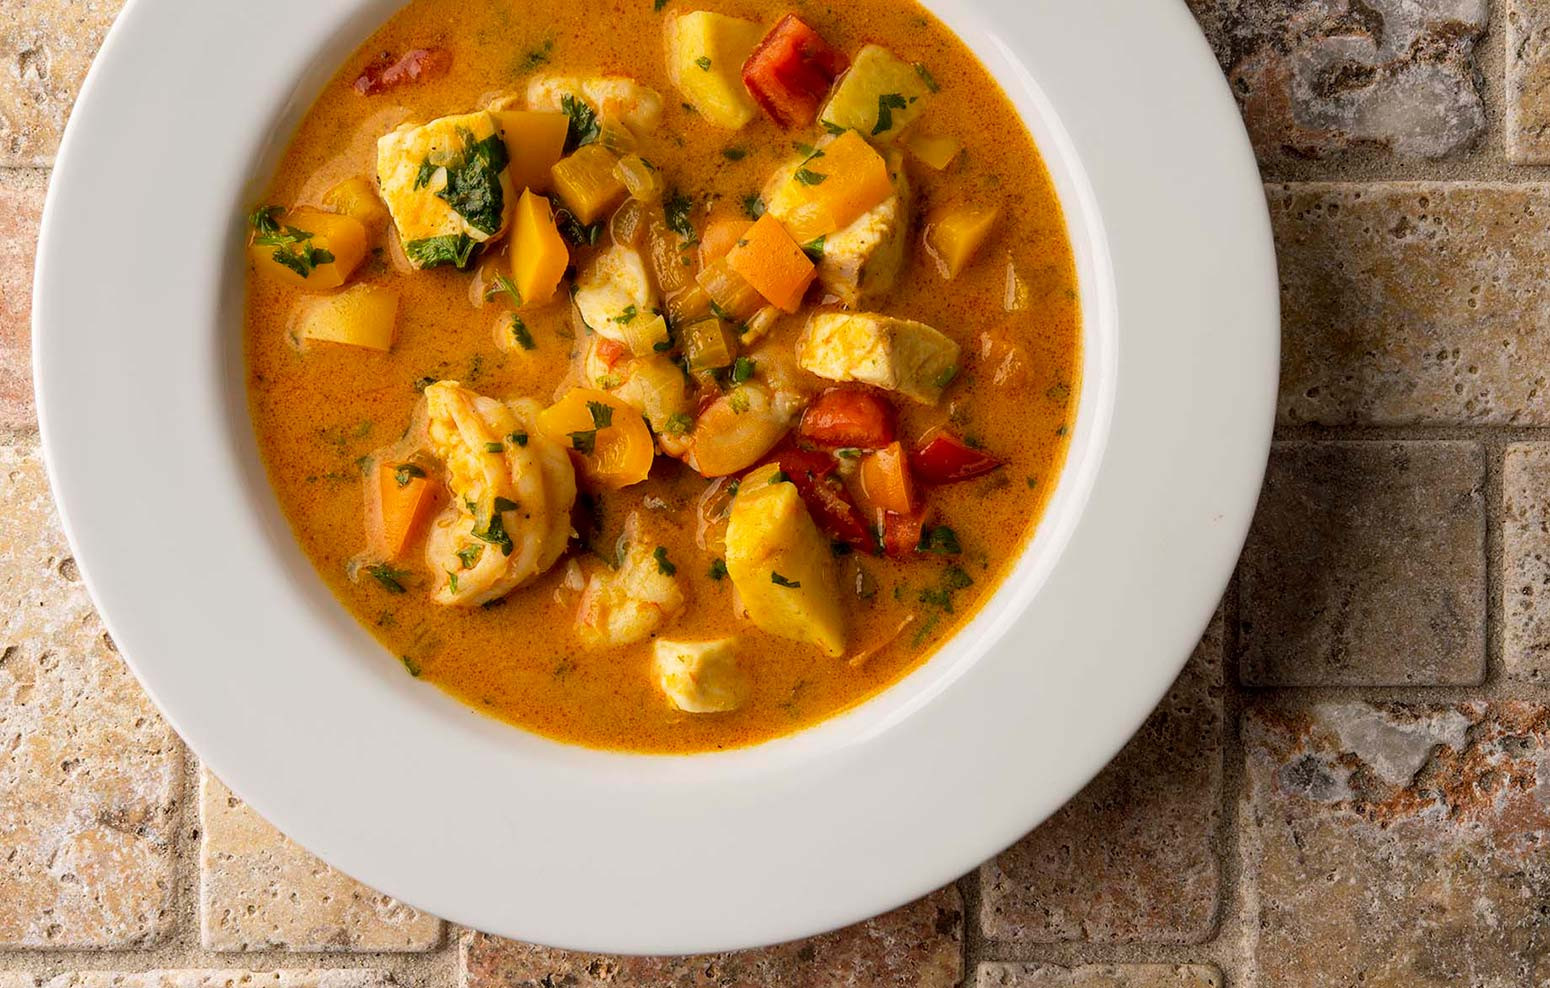 Recipes For Fish Stew
 Fish Stew Recipe A Recipe for East African Fish Stew